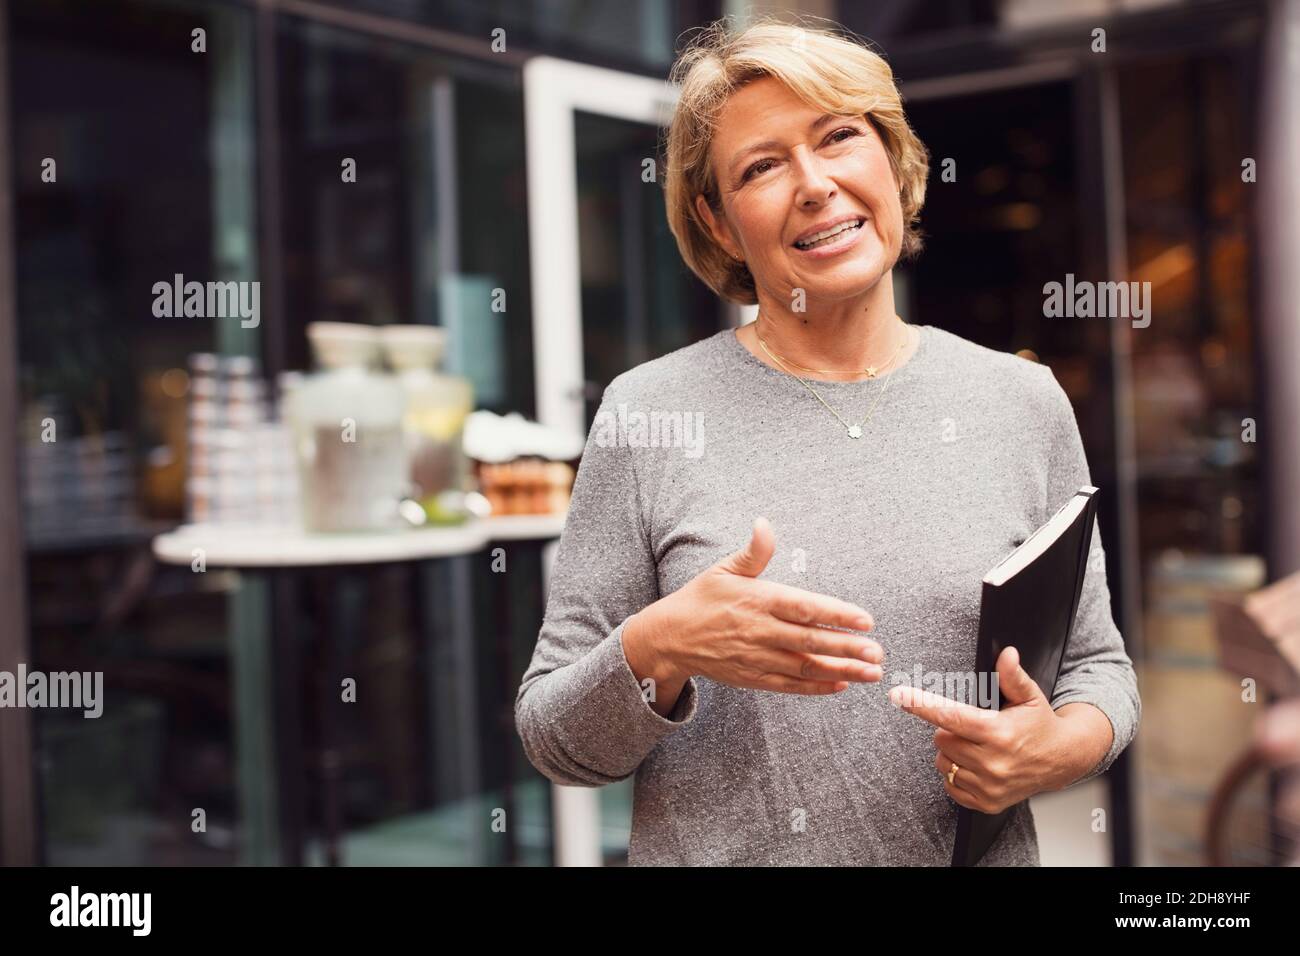 Happy businesswoman gesturing while standing at sidewalk cafe Stock Photo